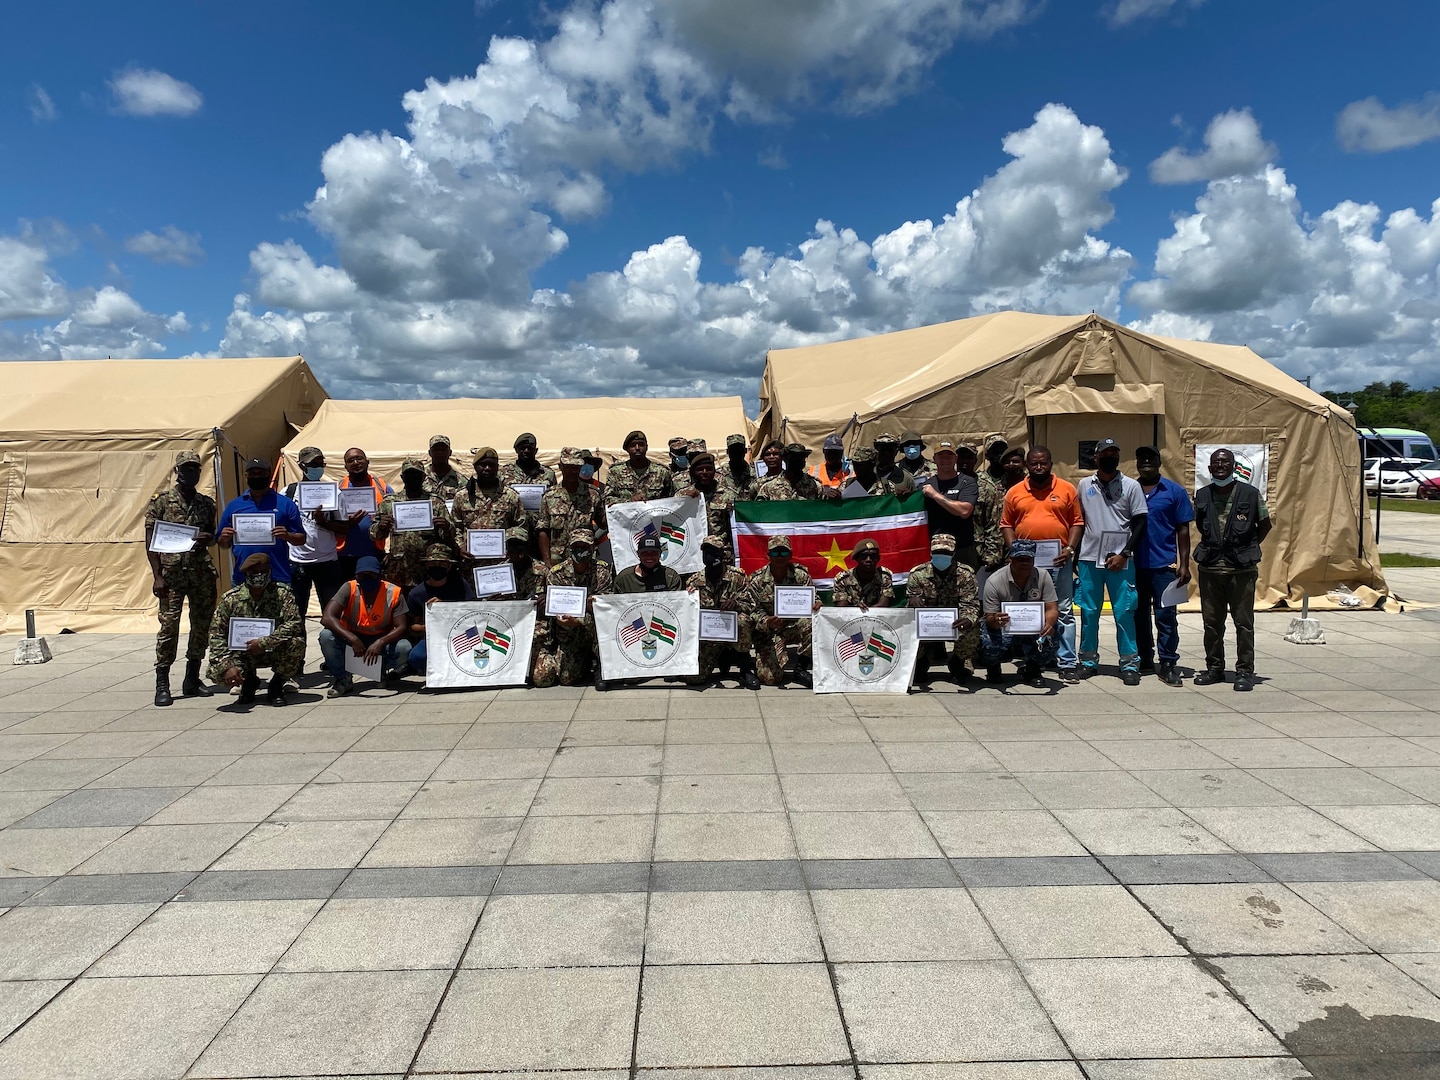 Members of the Surinamese Army, the Ministry of Health and National Coordination Center for Disaster Relief trainees pose in front of an assembled Mobile Hospital Package in Suriname during a ceremony July 23. The hospital, procured by DLA Troop Support's Construction and Equipment supply chain, was donated to the country through U.S. Southern Command's Humanitarian Assistance Program to assist with the pandemic.